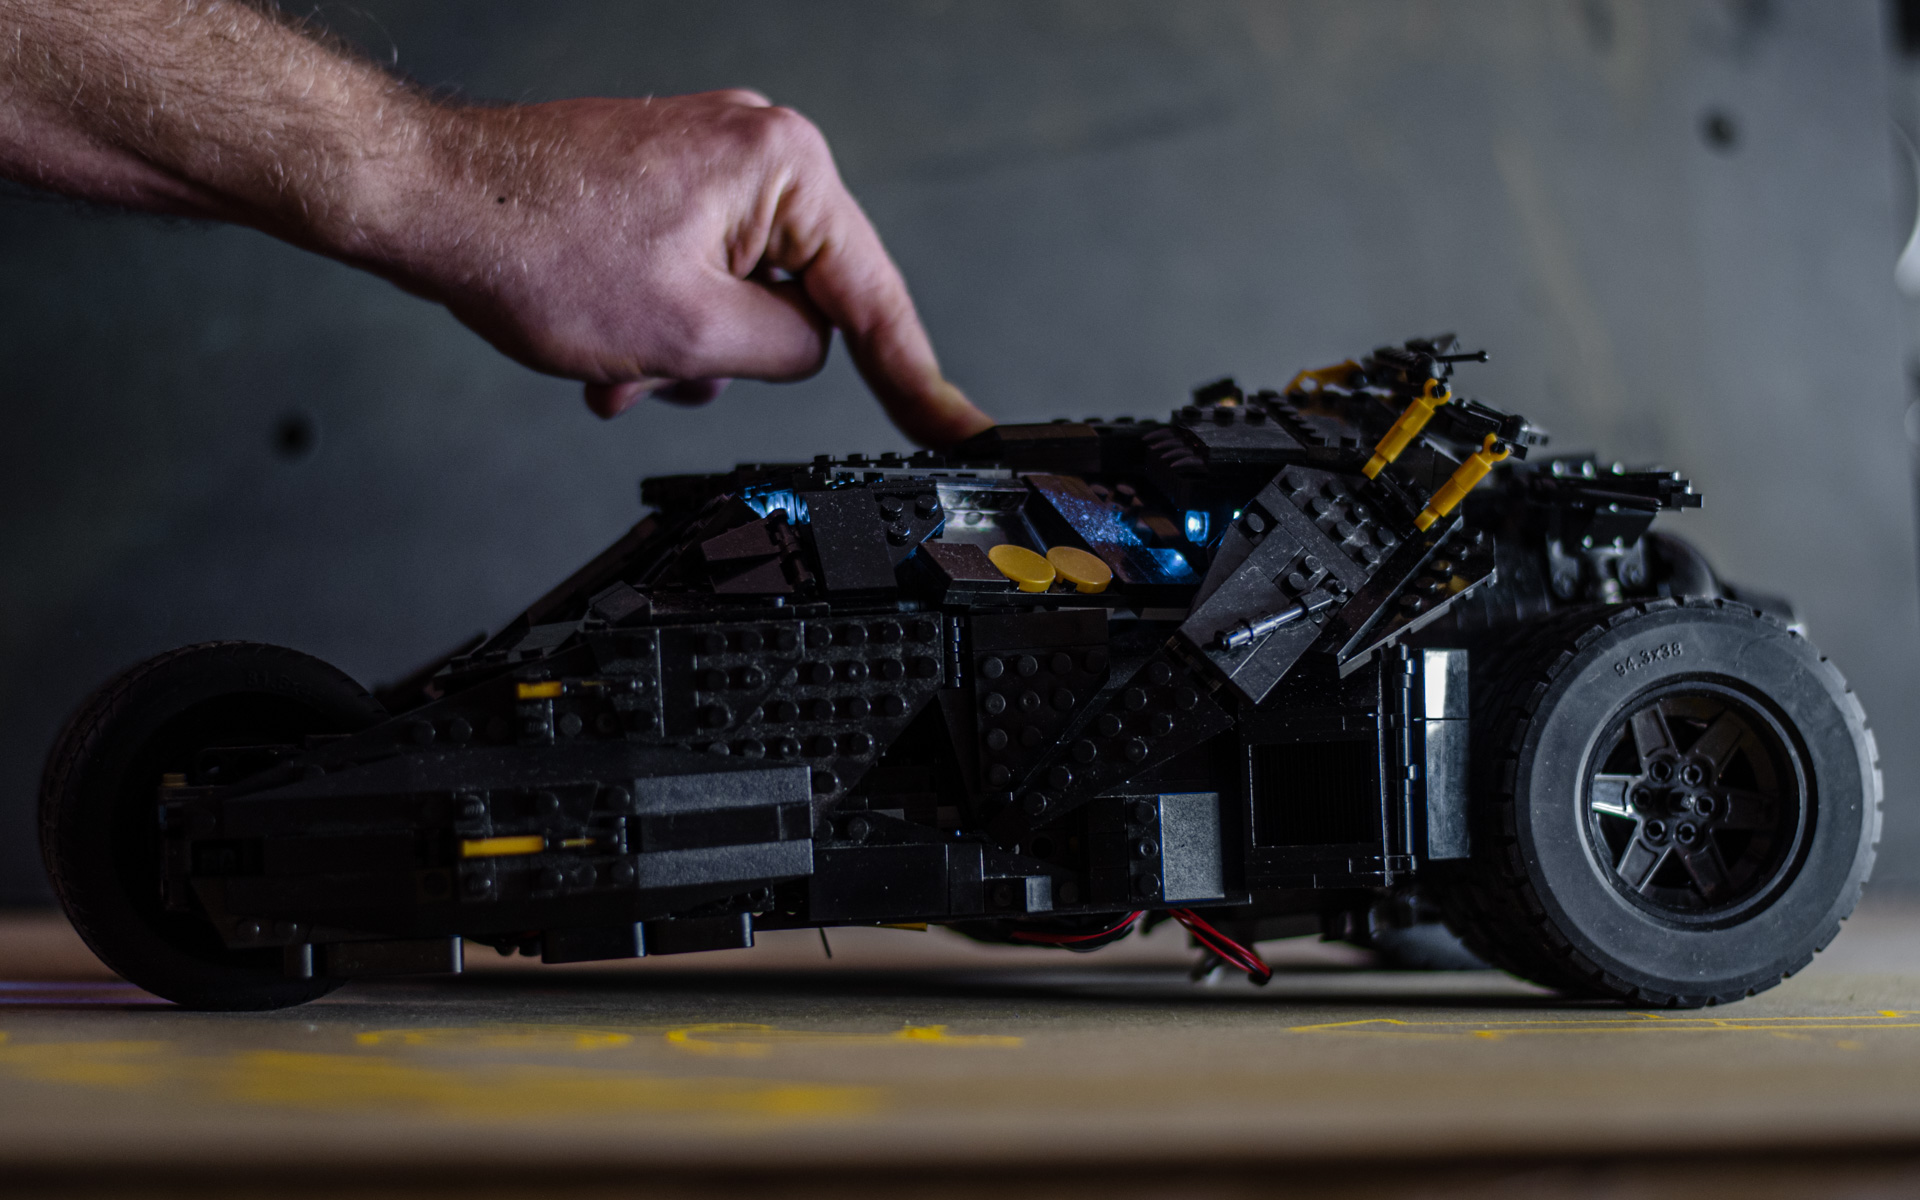 LEGO MOC RC ☆ Βatman Tumbler LEGO 76240 UCS ☆ Motorized and remote  controlled with power functions ☆ Batmobile from the dark knight by  reckless_glitch